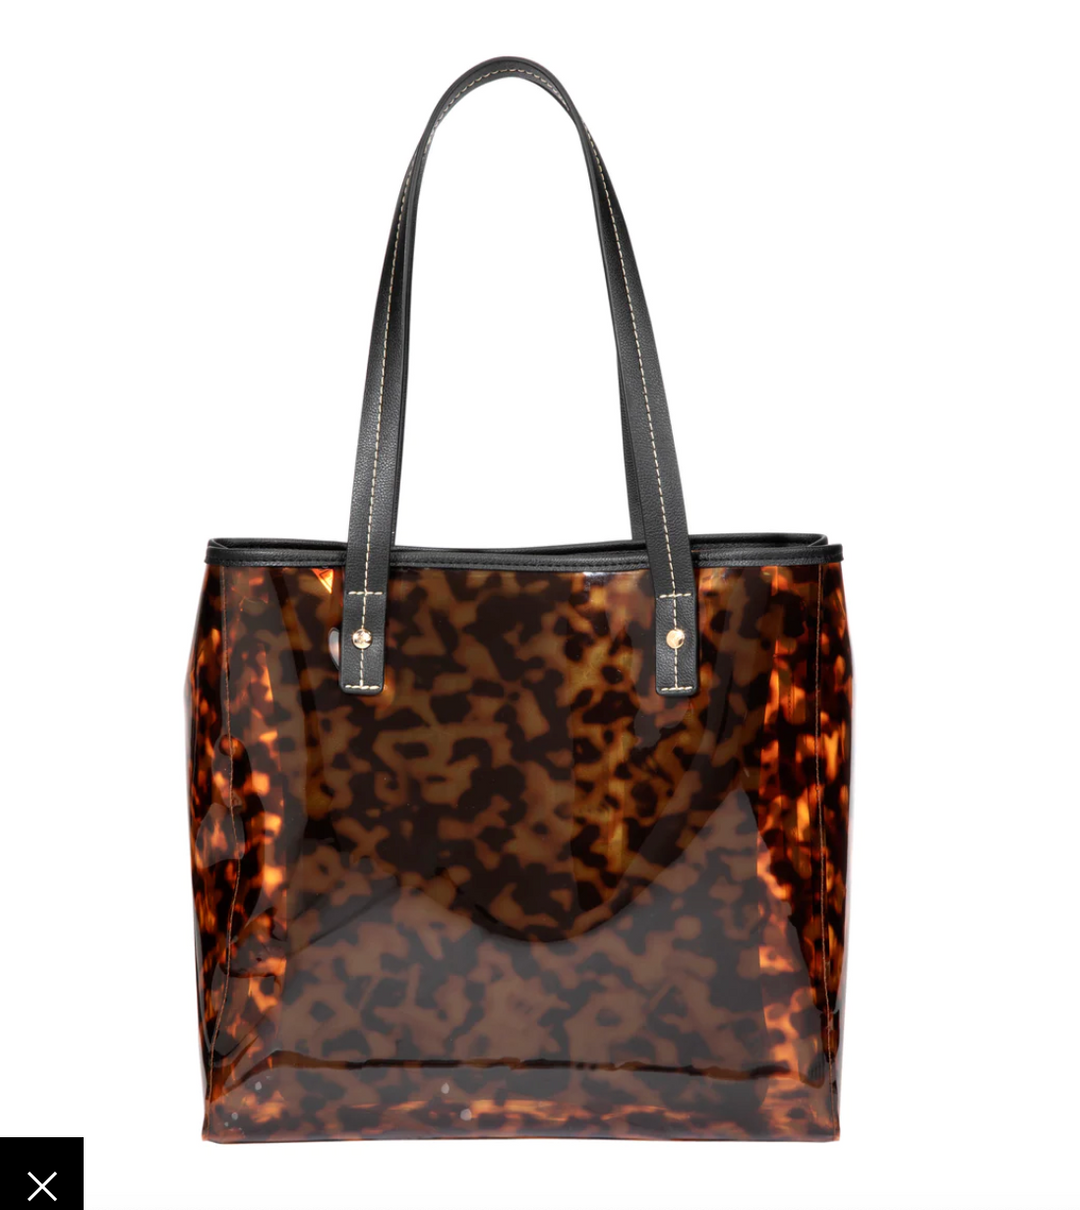 MIAMI CLEARLY TORTOISE PIPER TOTE WITH POUCH